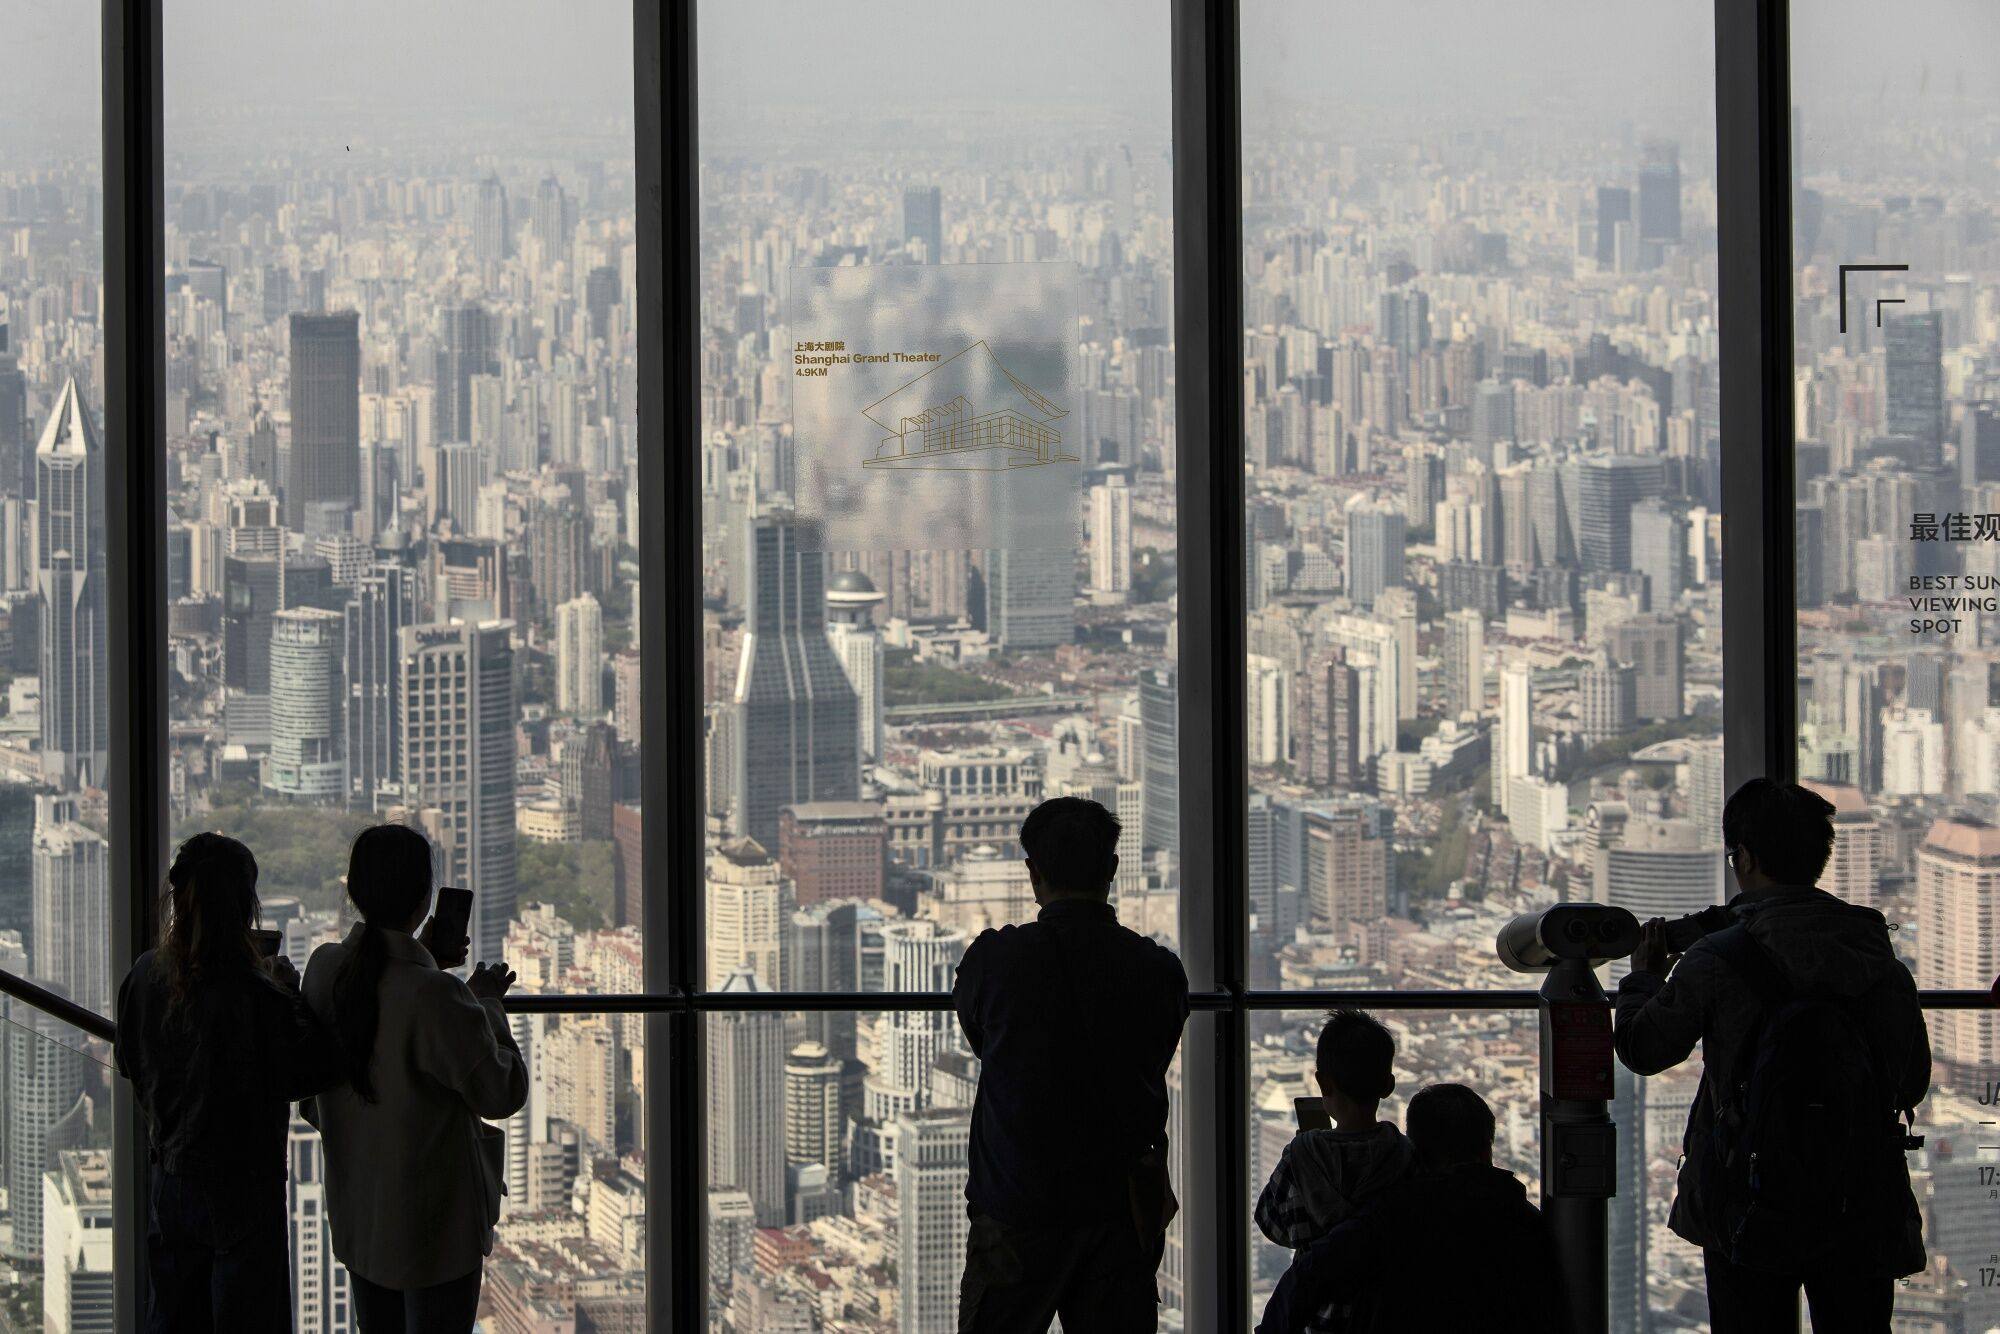 The growth of the industry will be buoyed by rising household wealth and the growth of the country’s pension system, according to the report. Photo: Bloomberg